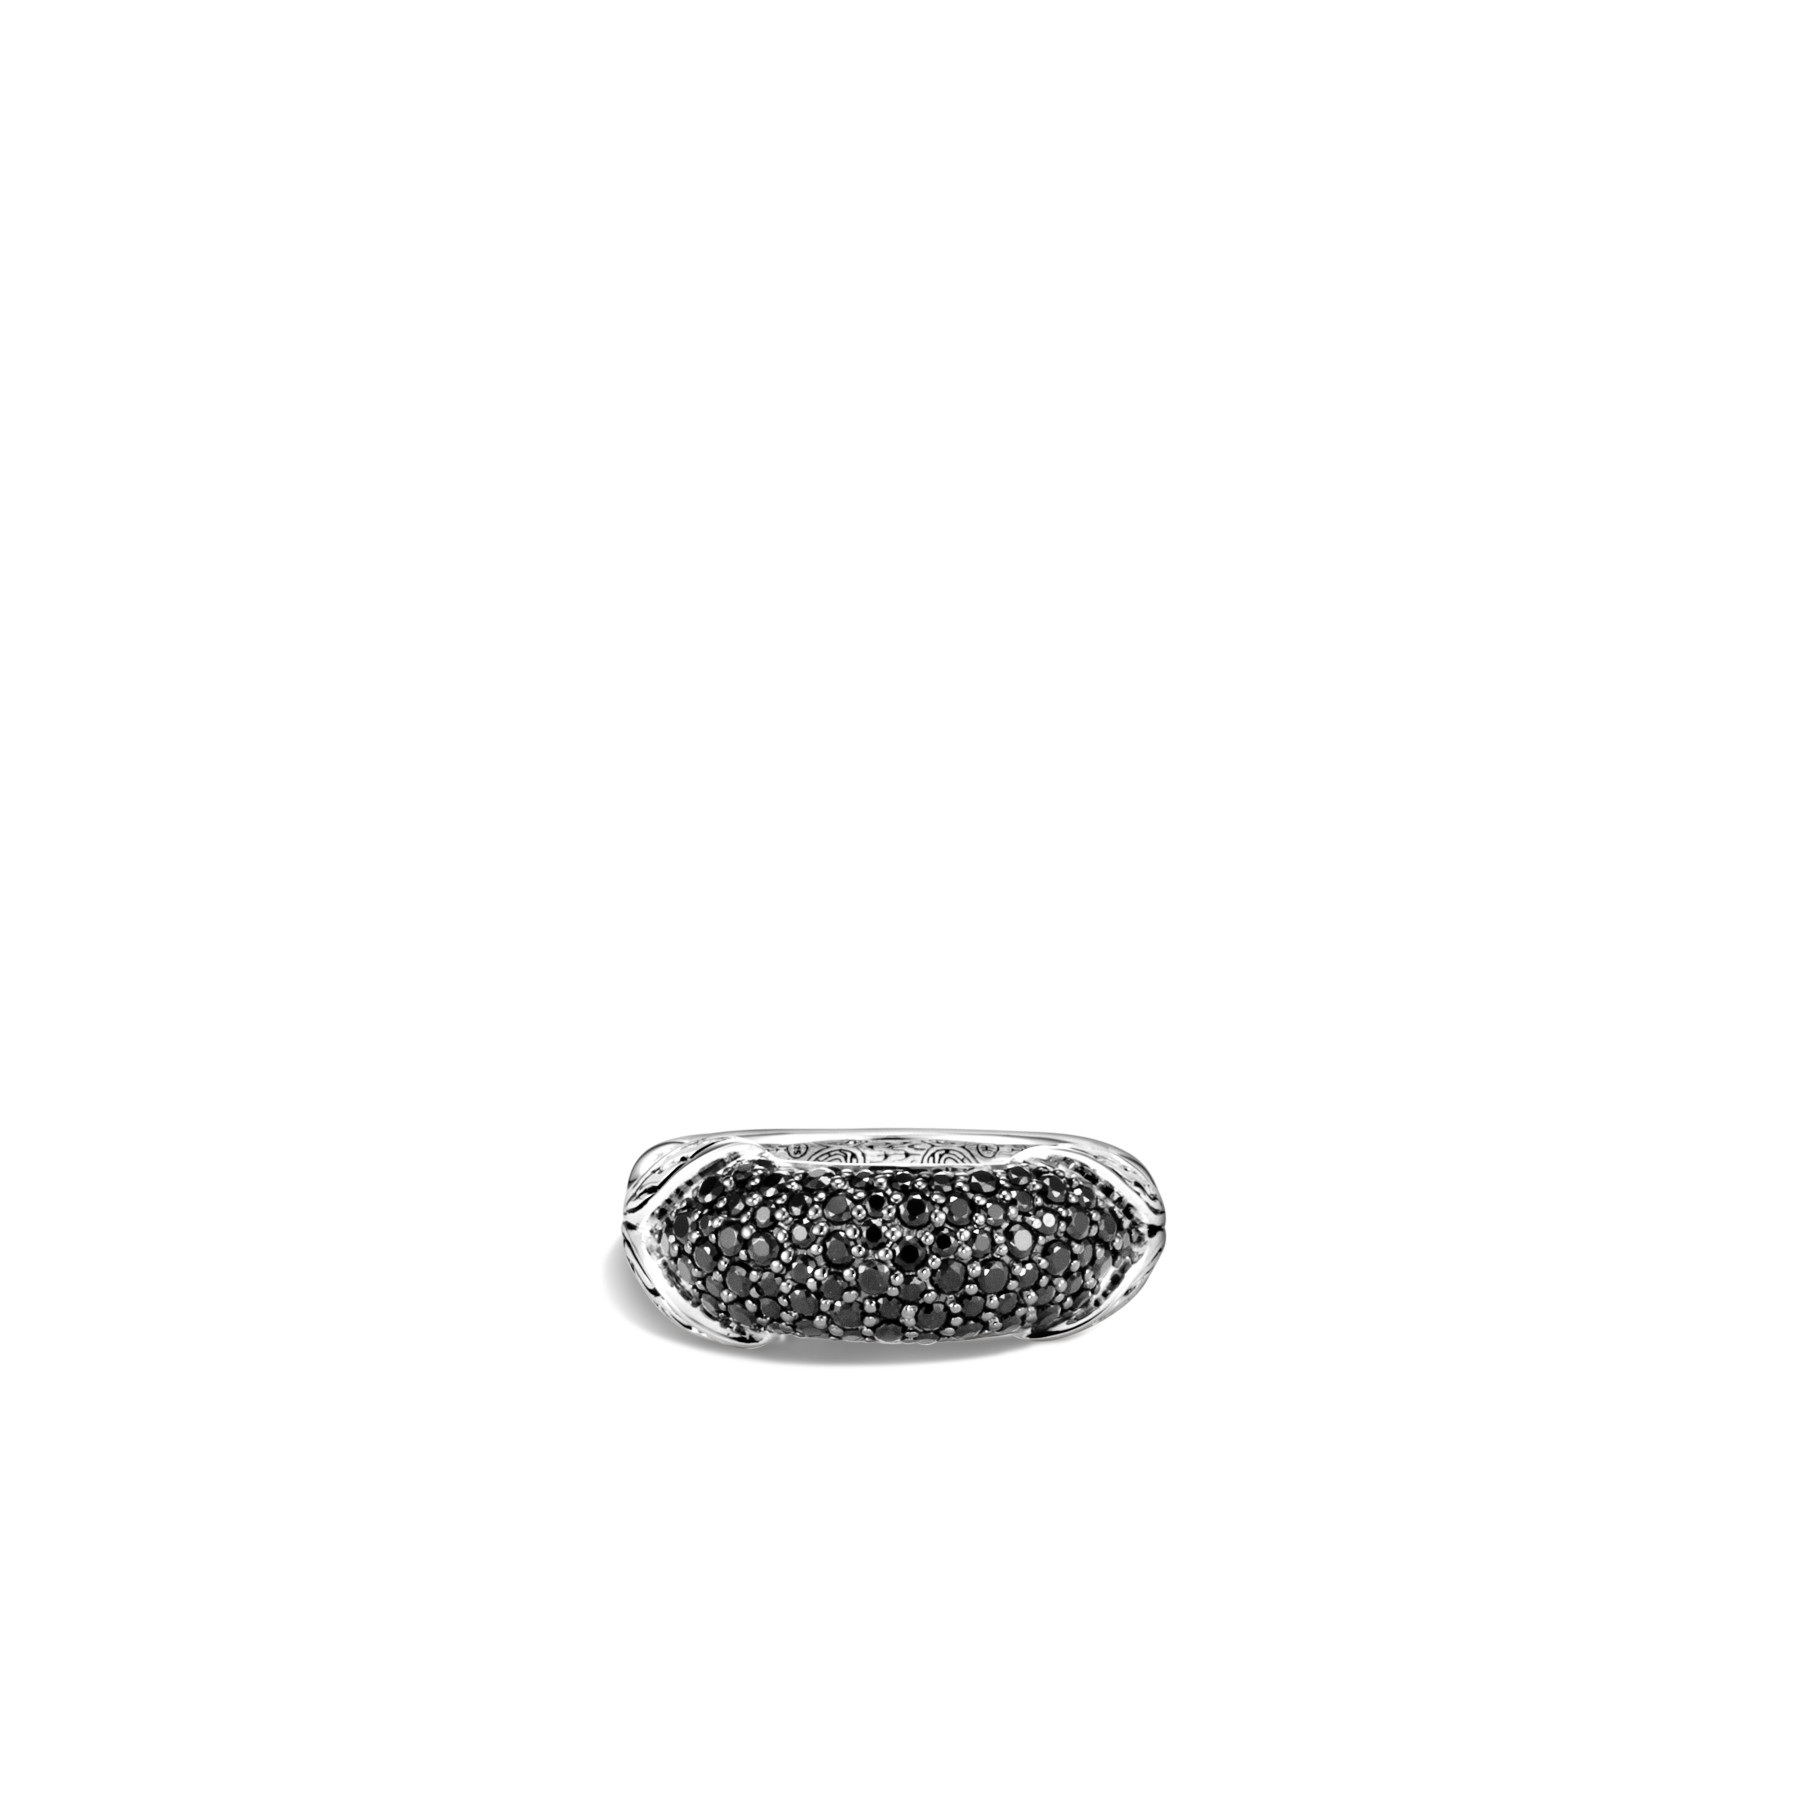 John Hardy Asli Classic Chain Silver and Black Gemstone Ring top view